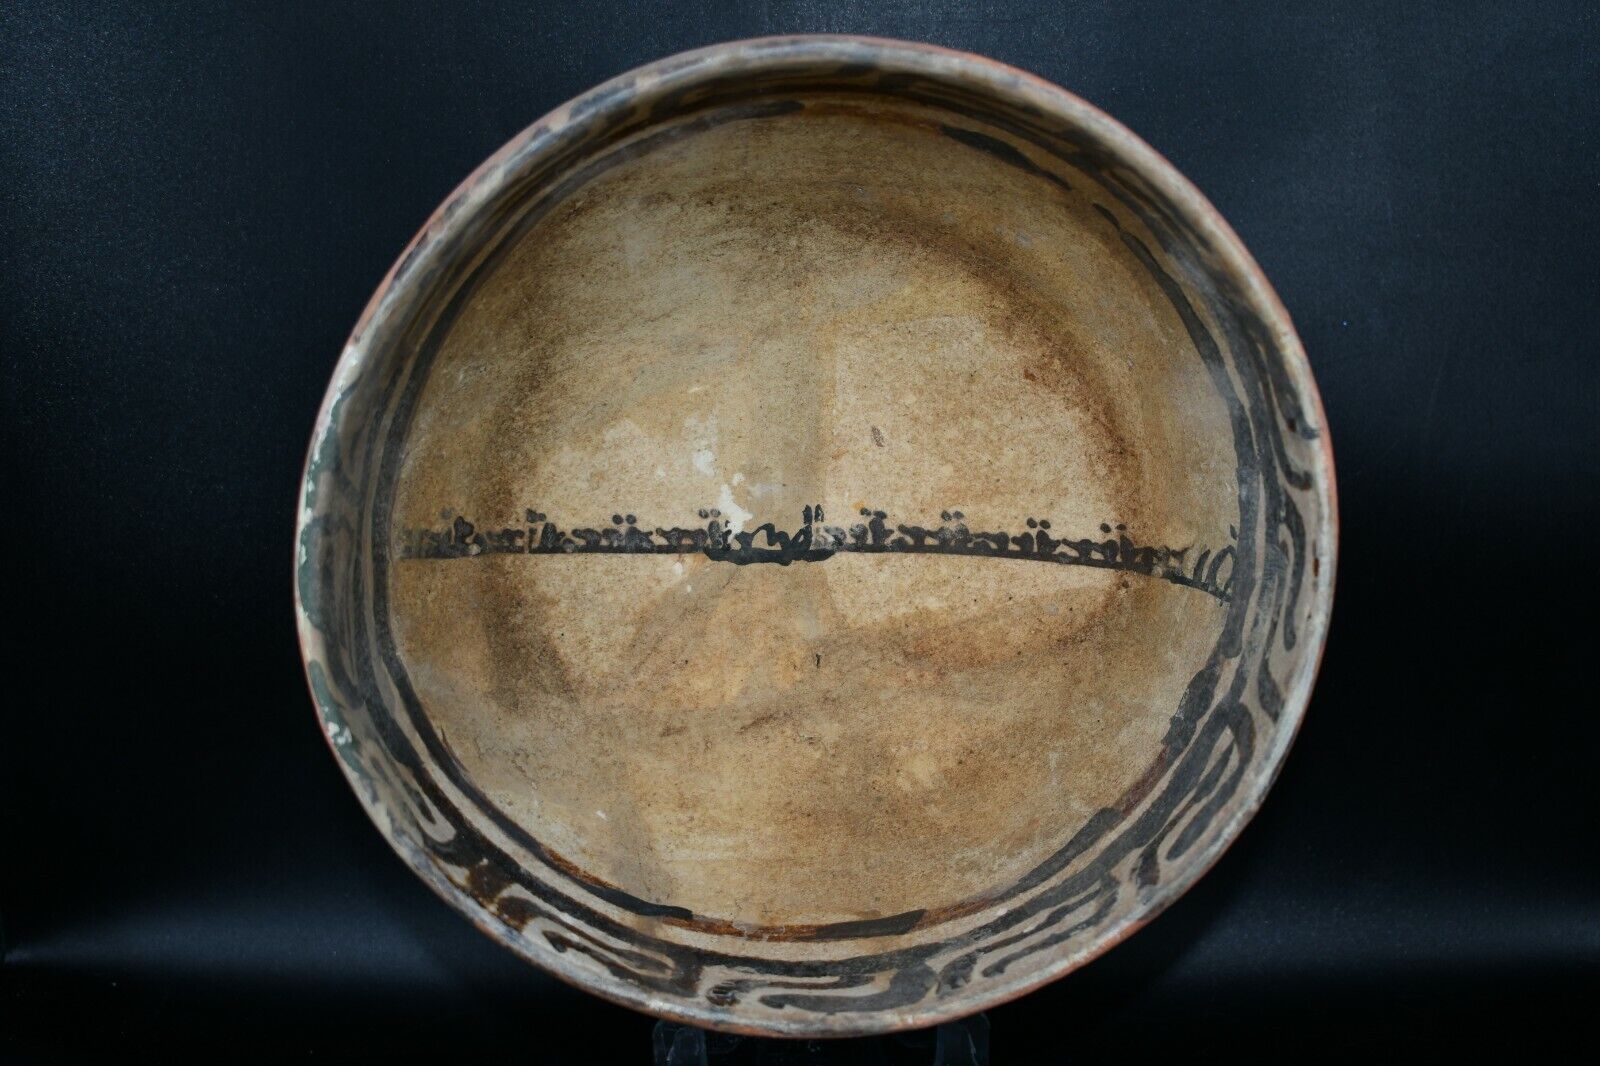 Genuine Intact Ancient Islamic Samanid Ceramic Bowl with Kufic Calligraphy